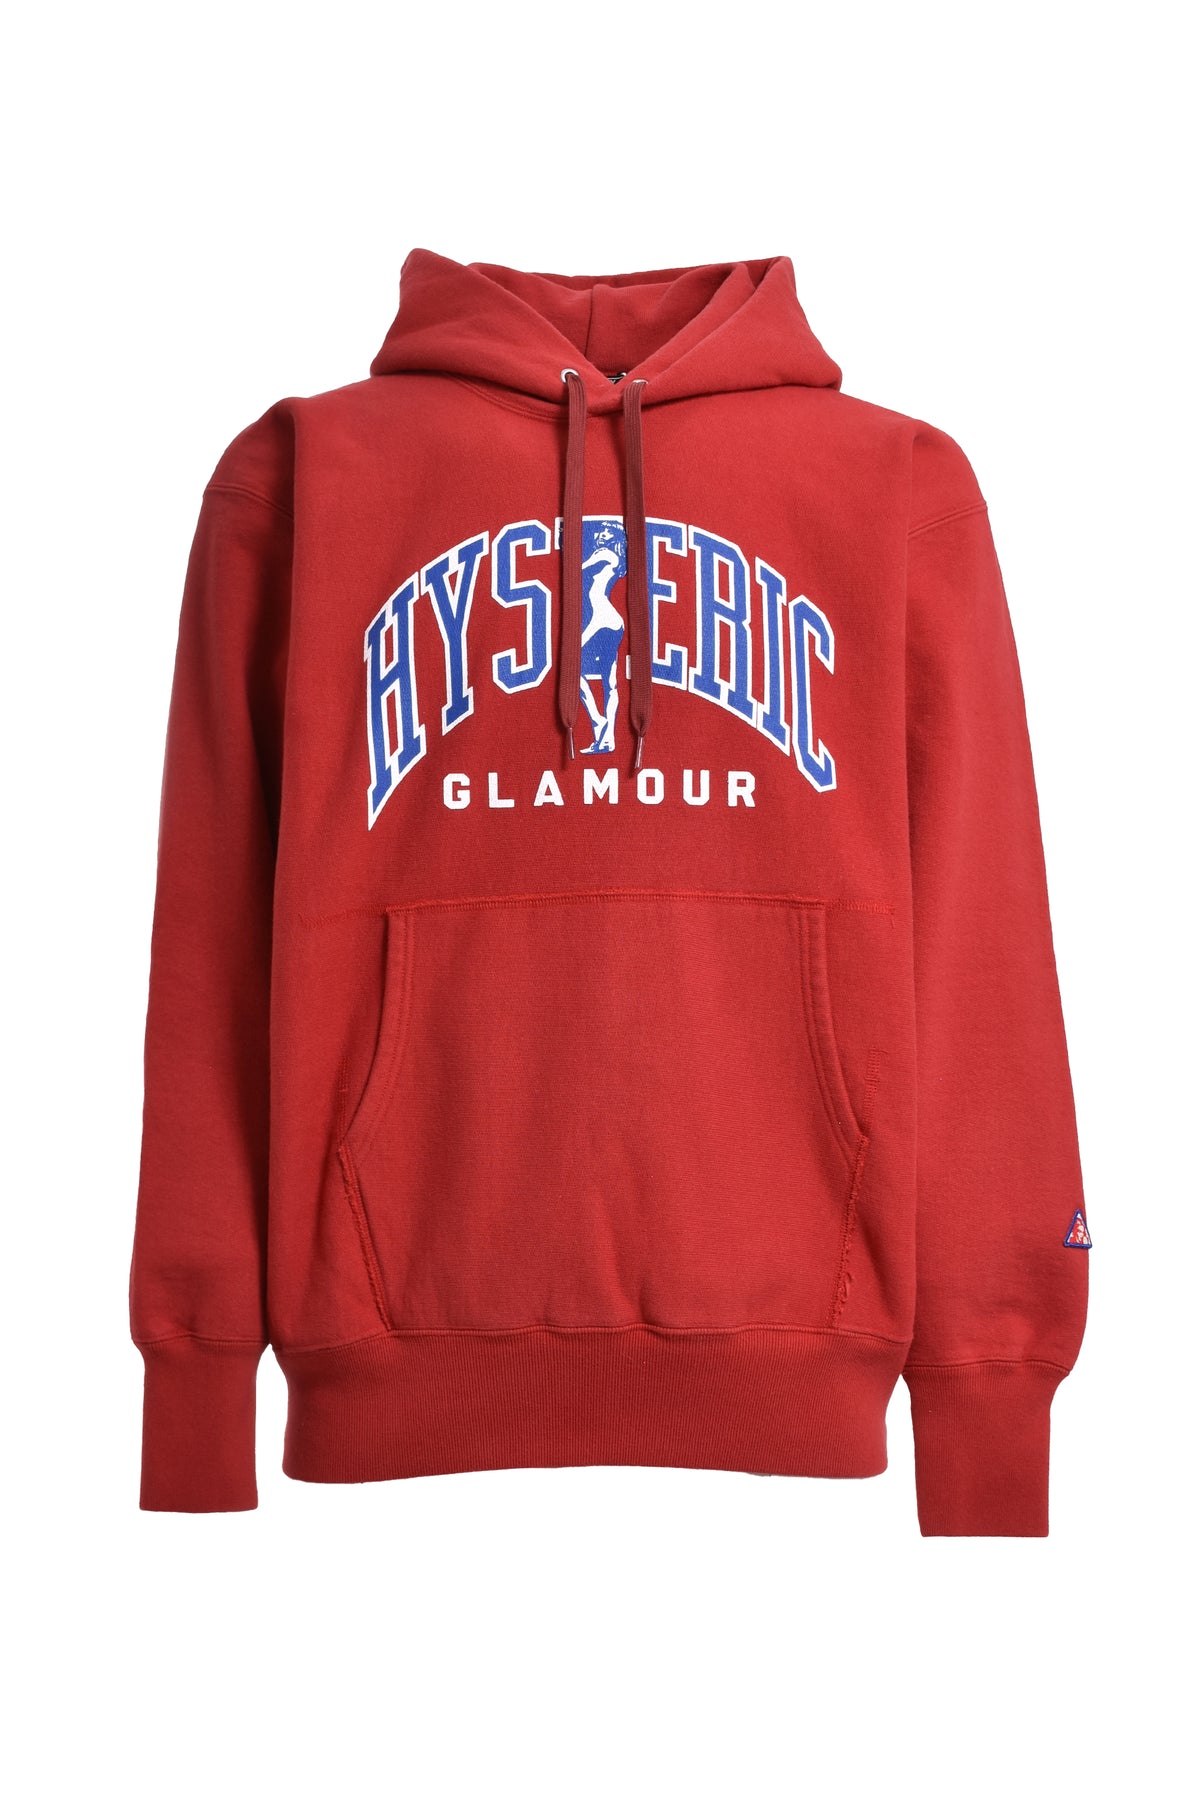 HYSTERIC GLAMOUR HYSTERIC GIRL HEAVYWEIGHT HOODIE / RED